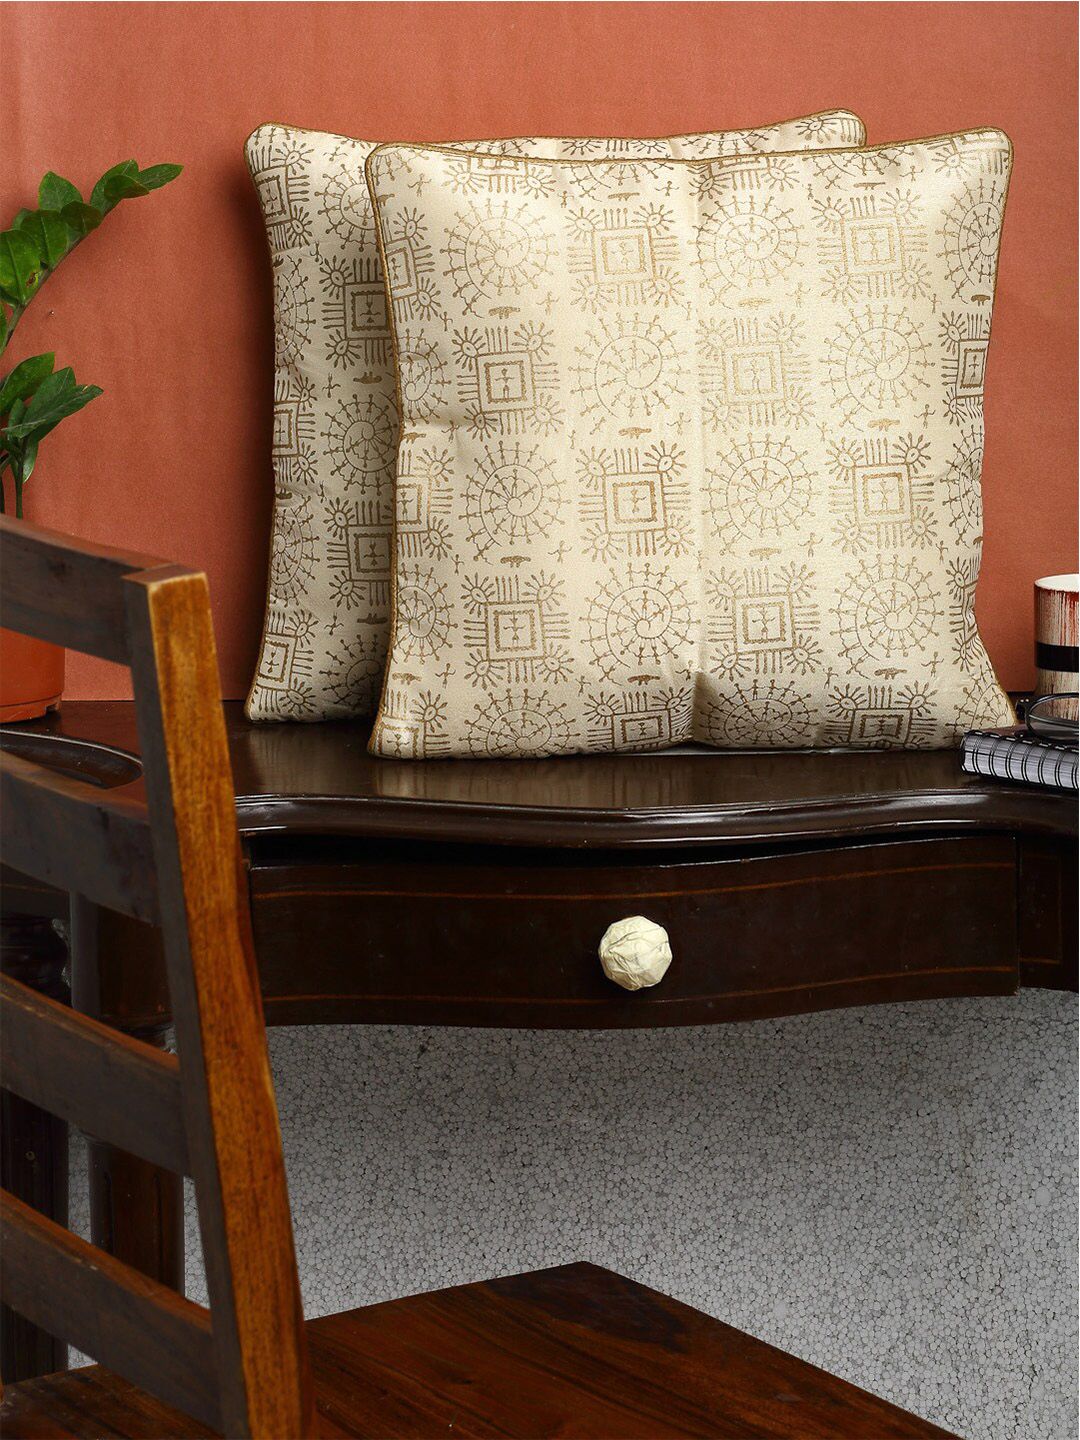 HOSTA HOMES Cream-Coloured & Gold-Toned Set of 2 Ethnic Motifs Square Cushion Covers Price in India